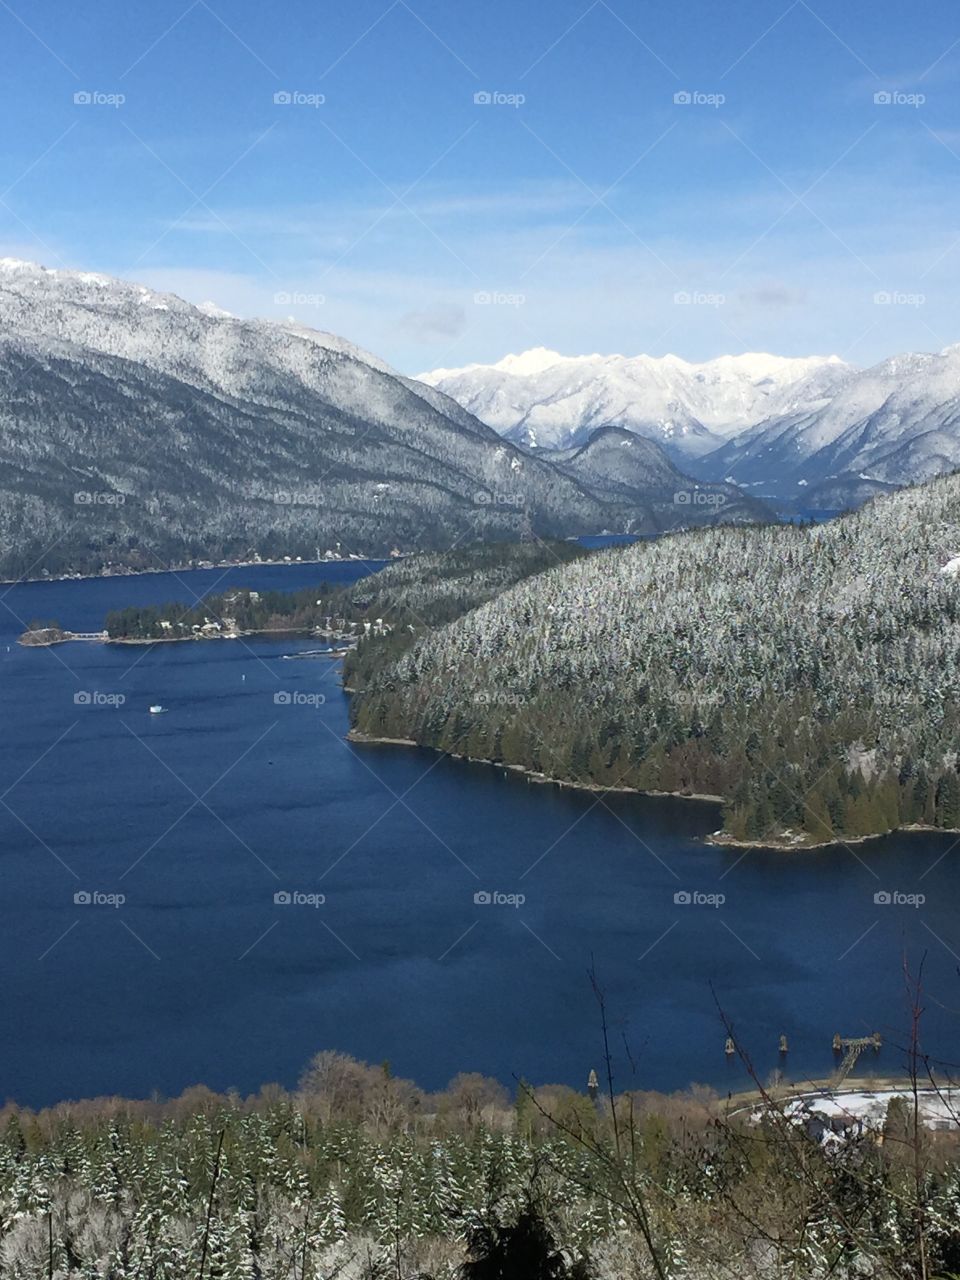 View of snowy Burrard Inlet from Burnaby Mountain on a crisp winter day